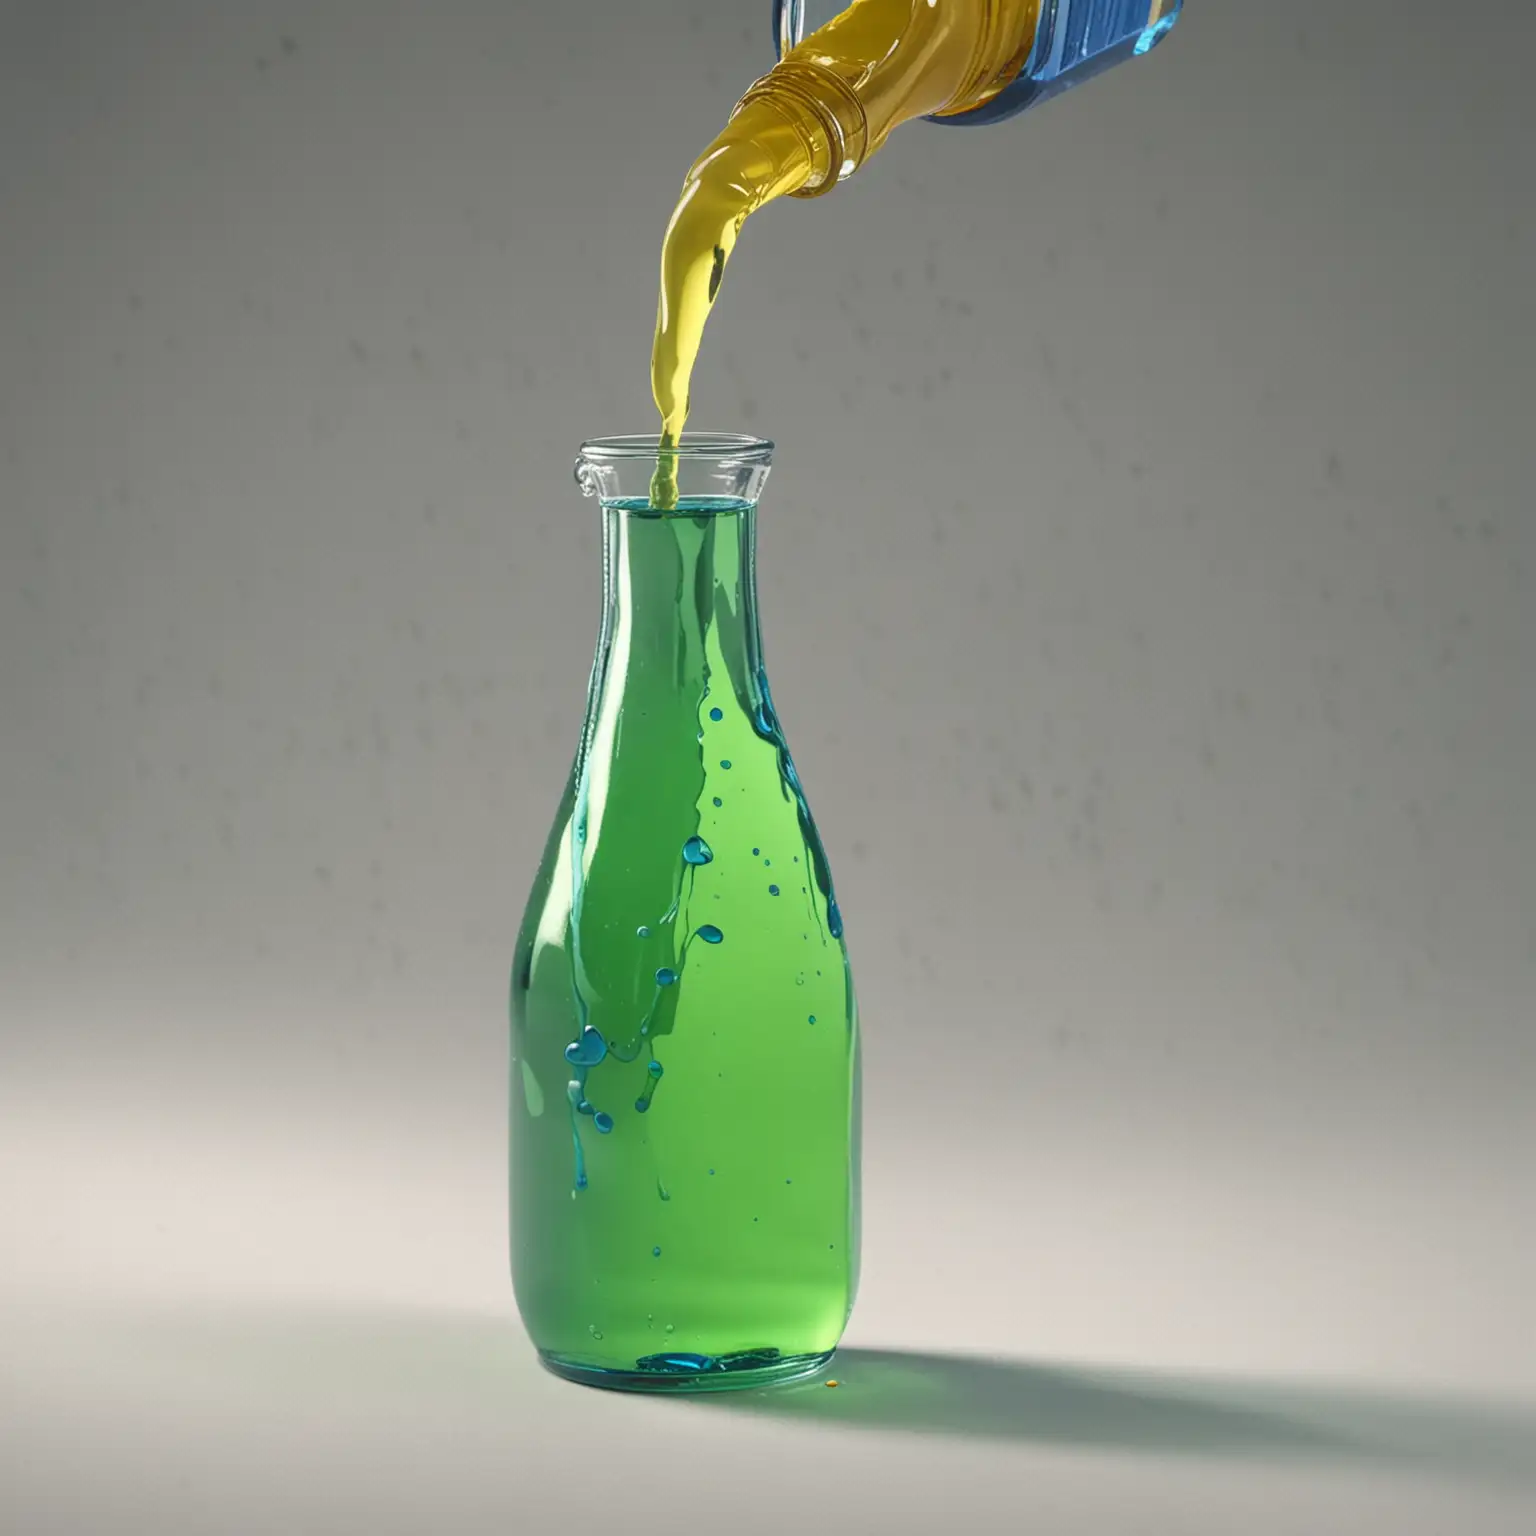 Mixing Blue and Yellow Liquids to Create Green Liquid in Bottle